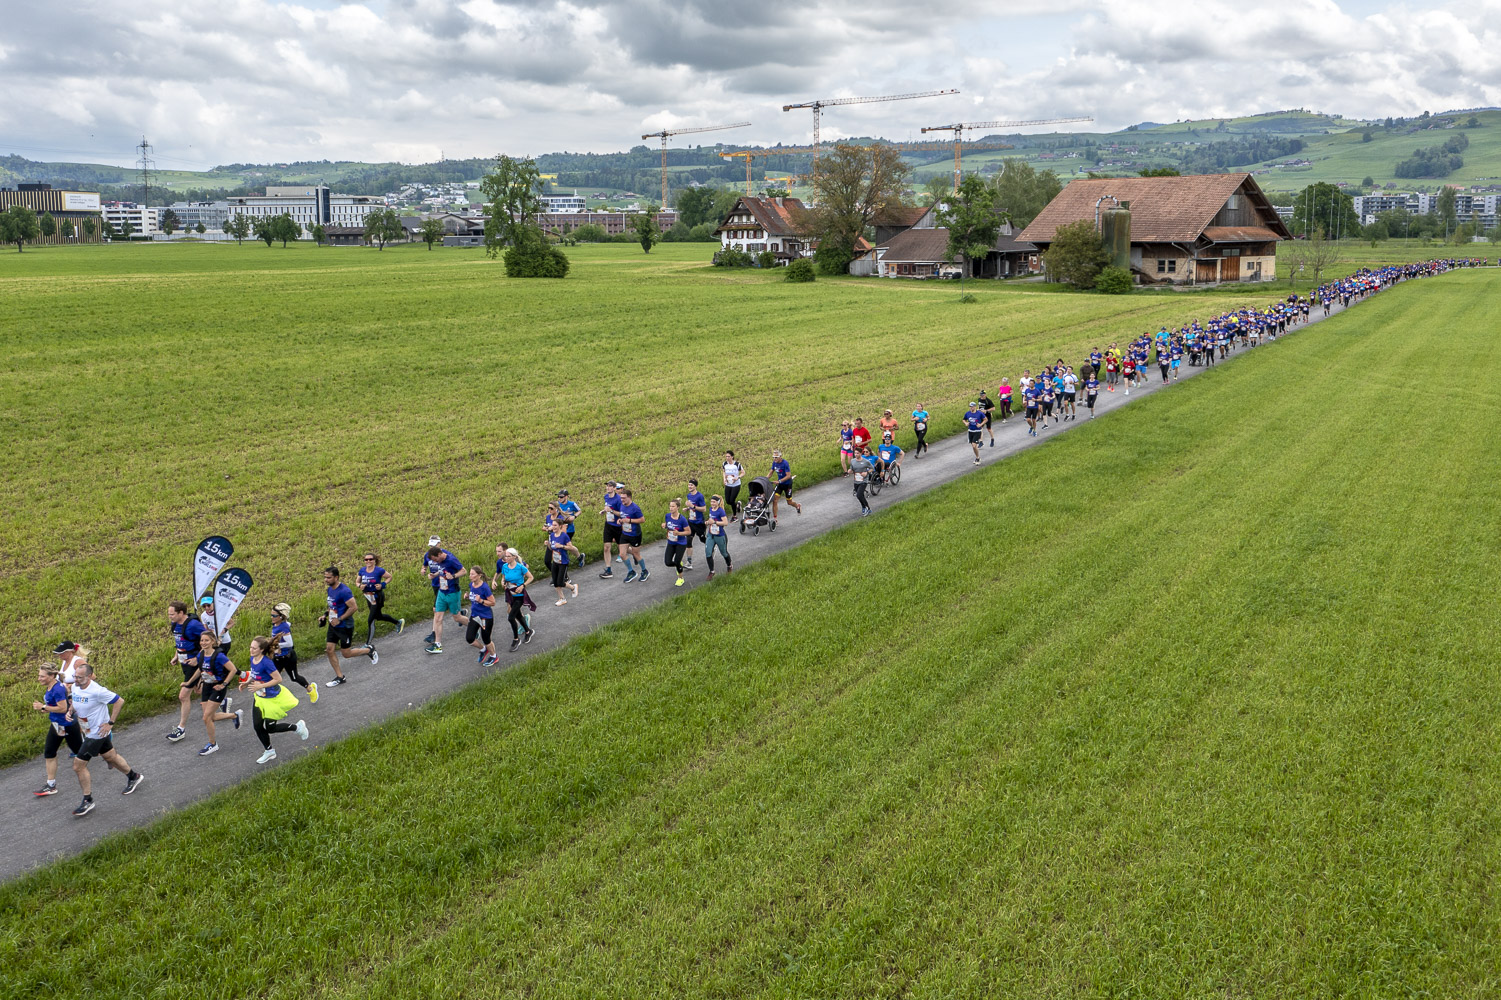 wings for life run, stadt zug, 08.05.2022